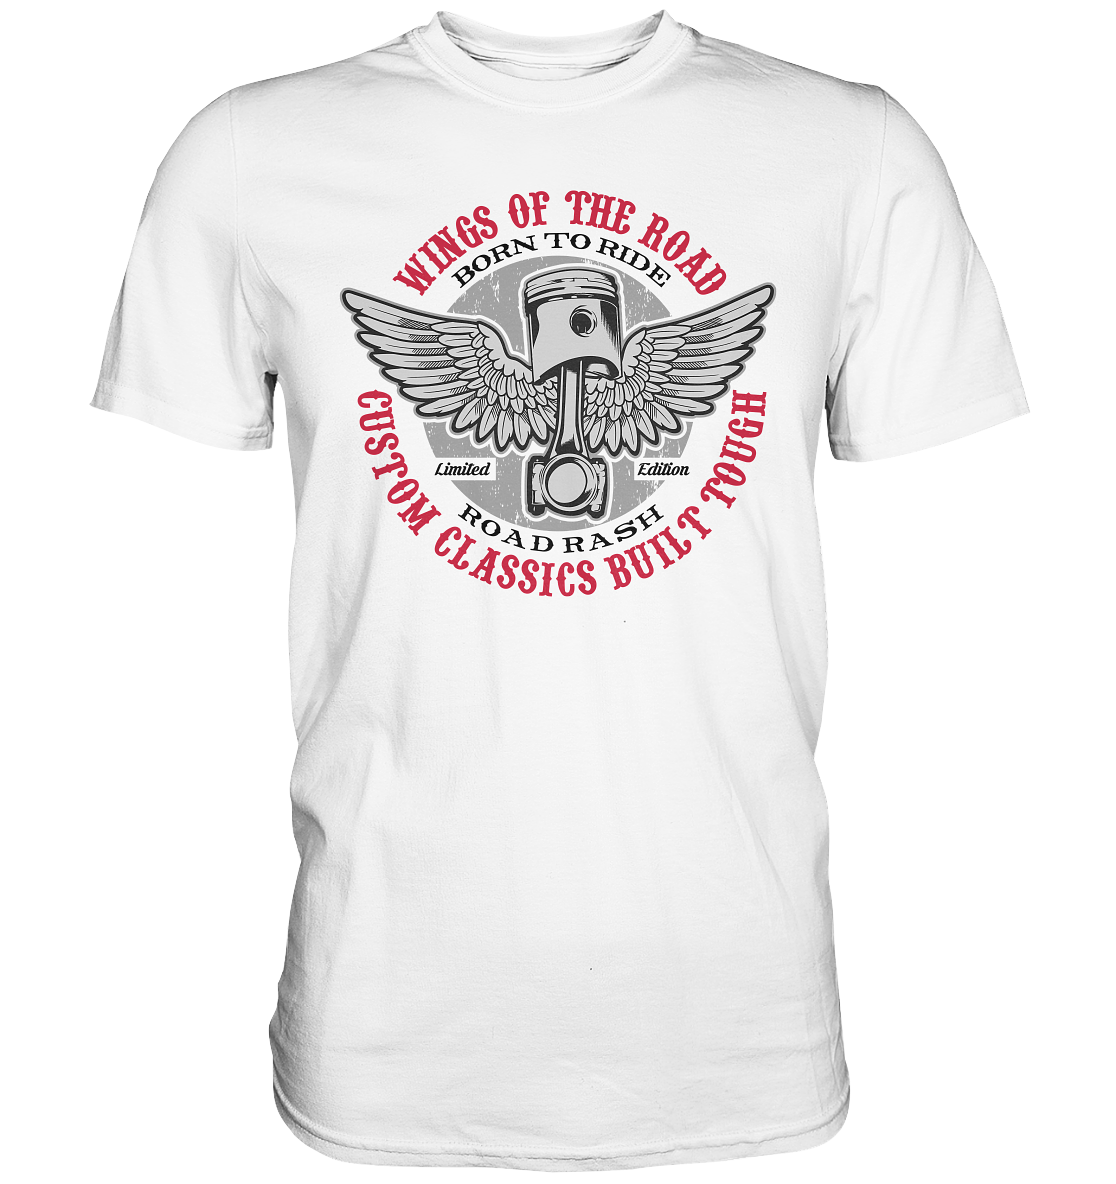 Wings of the road, born to ride - Premium unisex Shirt